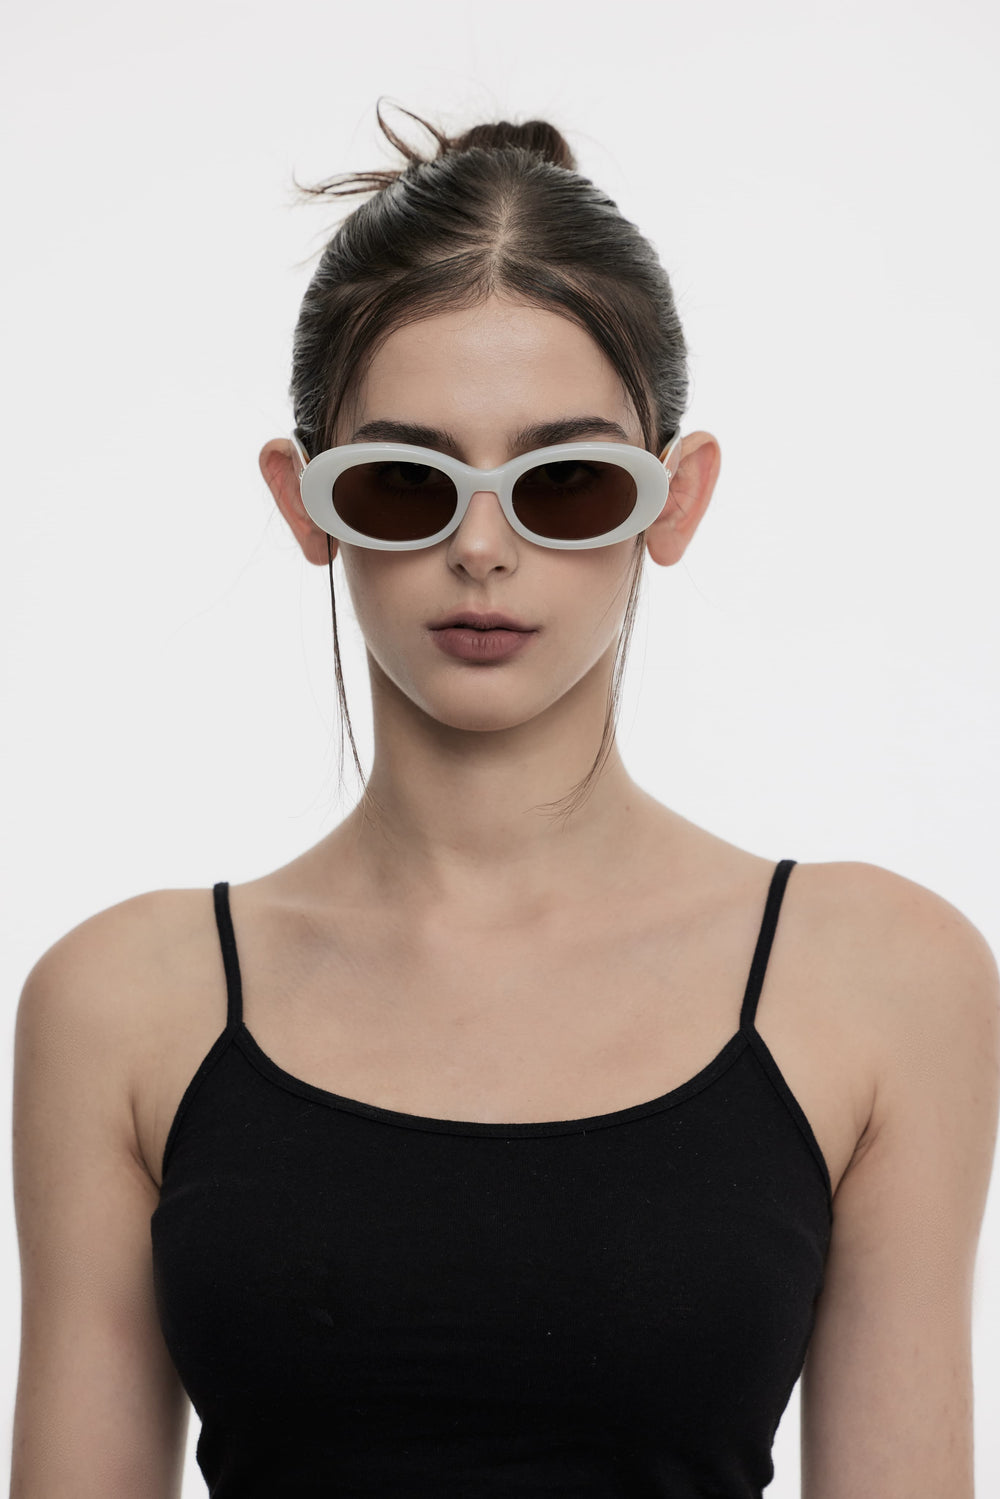 Female Model of her front face wearing Triangulum in white round High-quality sunglasses from Mercury Retrograde Galaxy Collection 